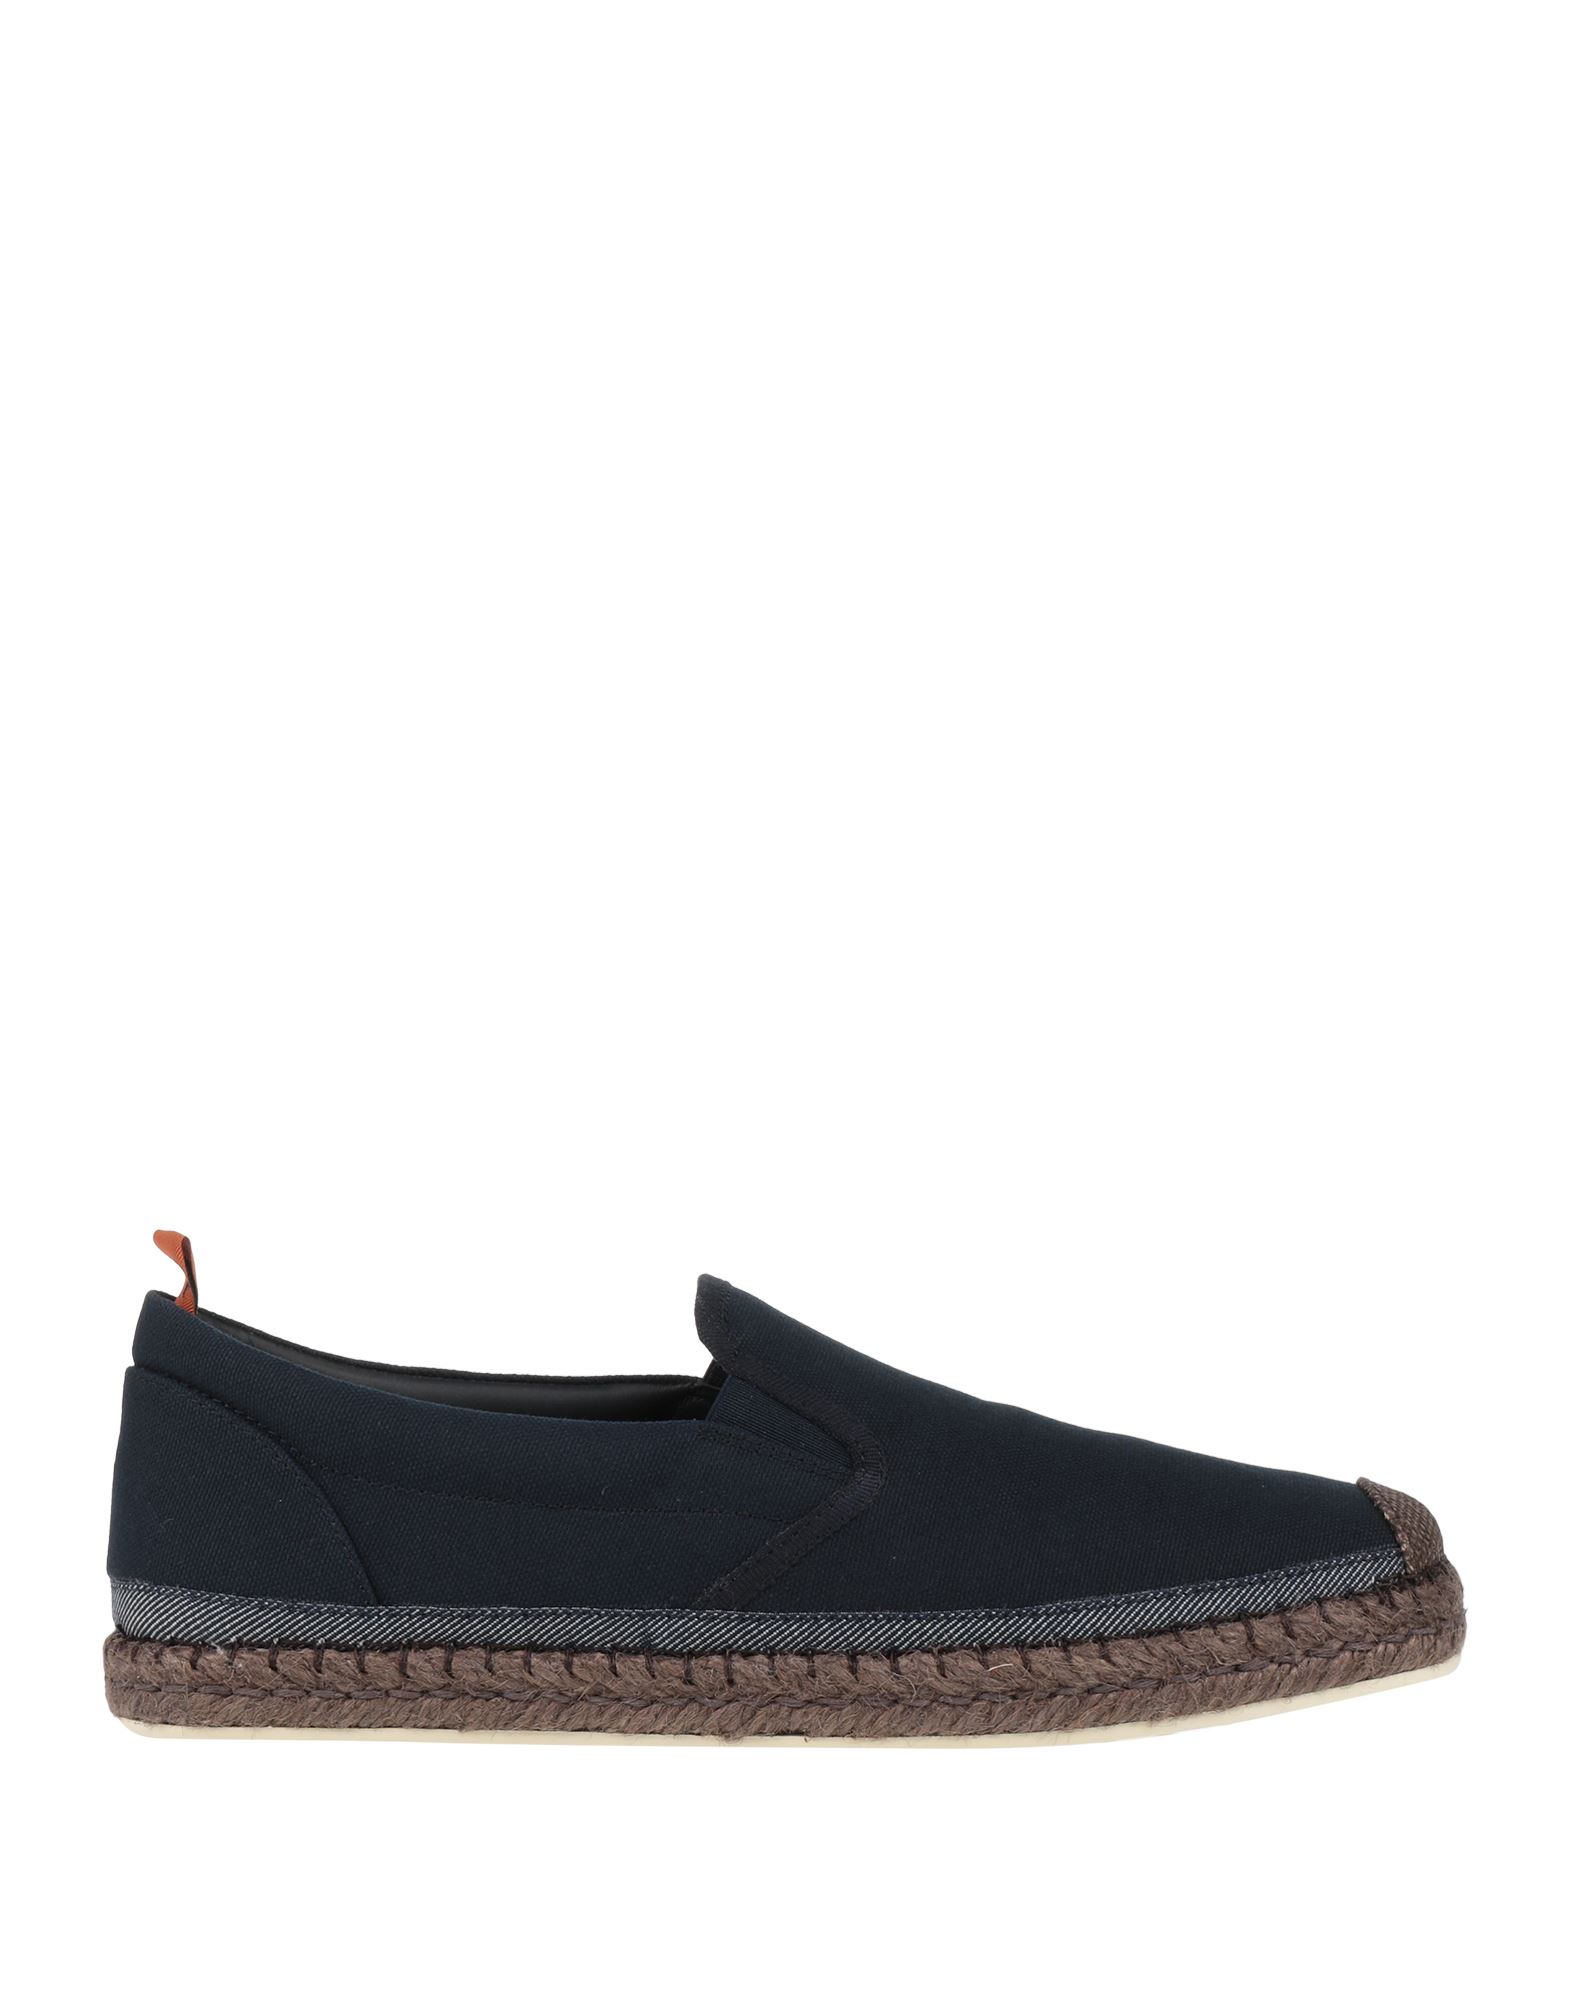 Tod's Espadrilles In Blue